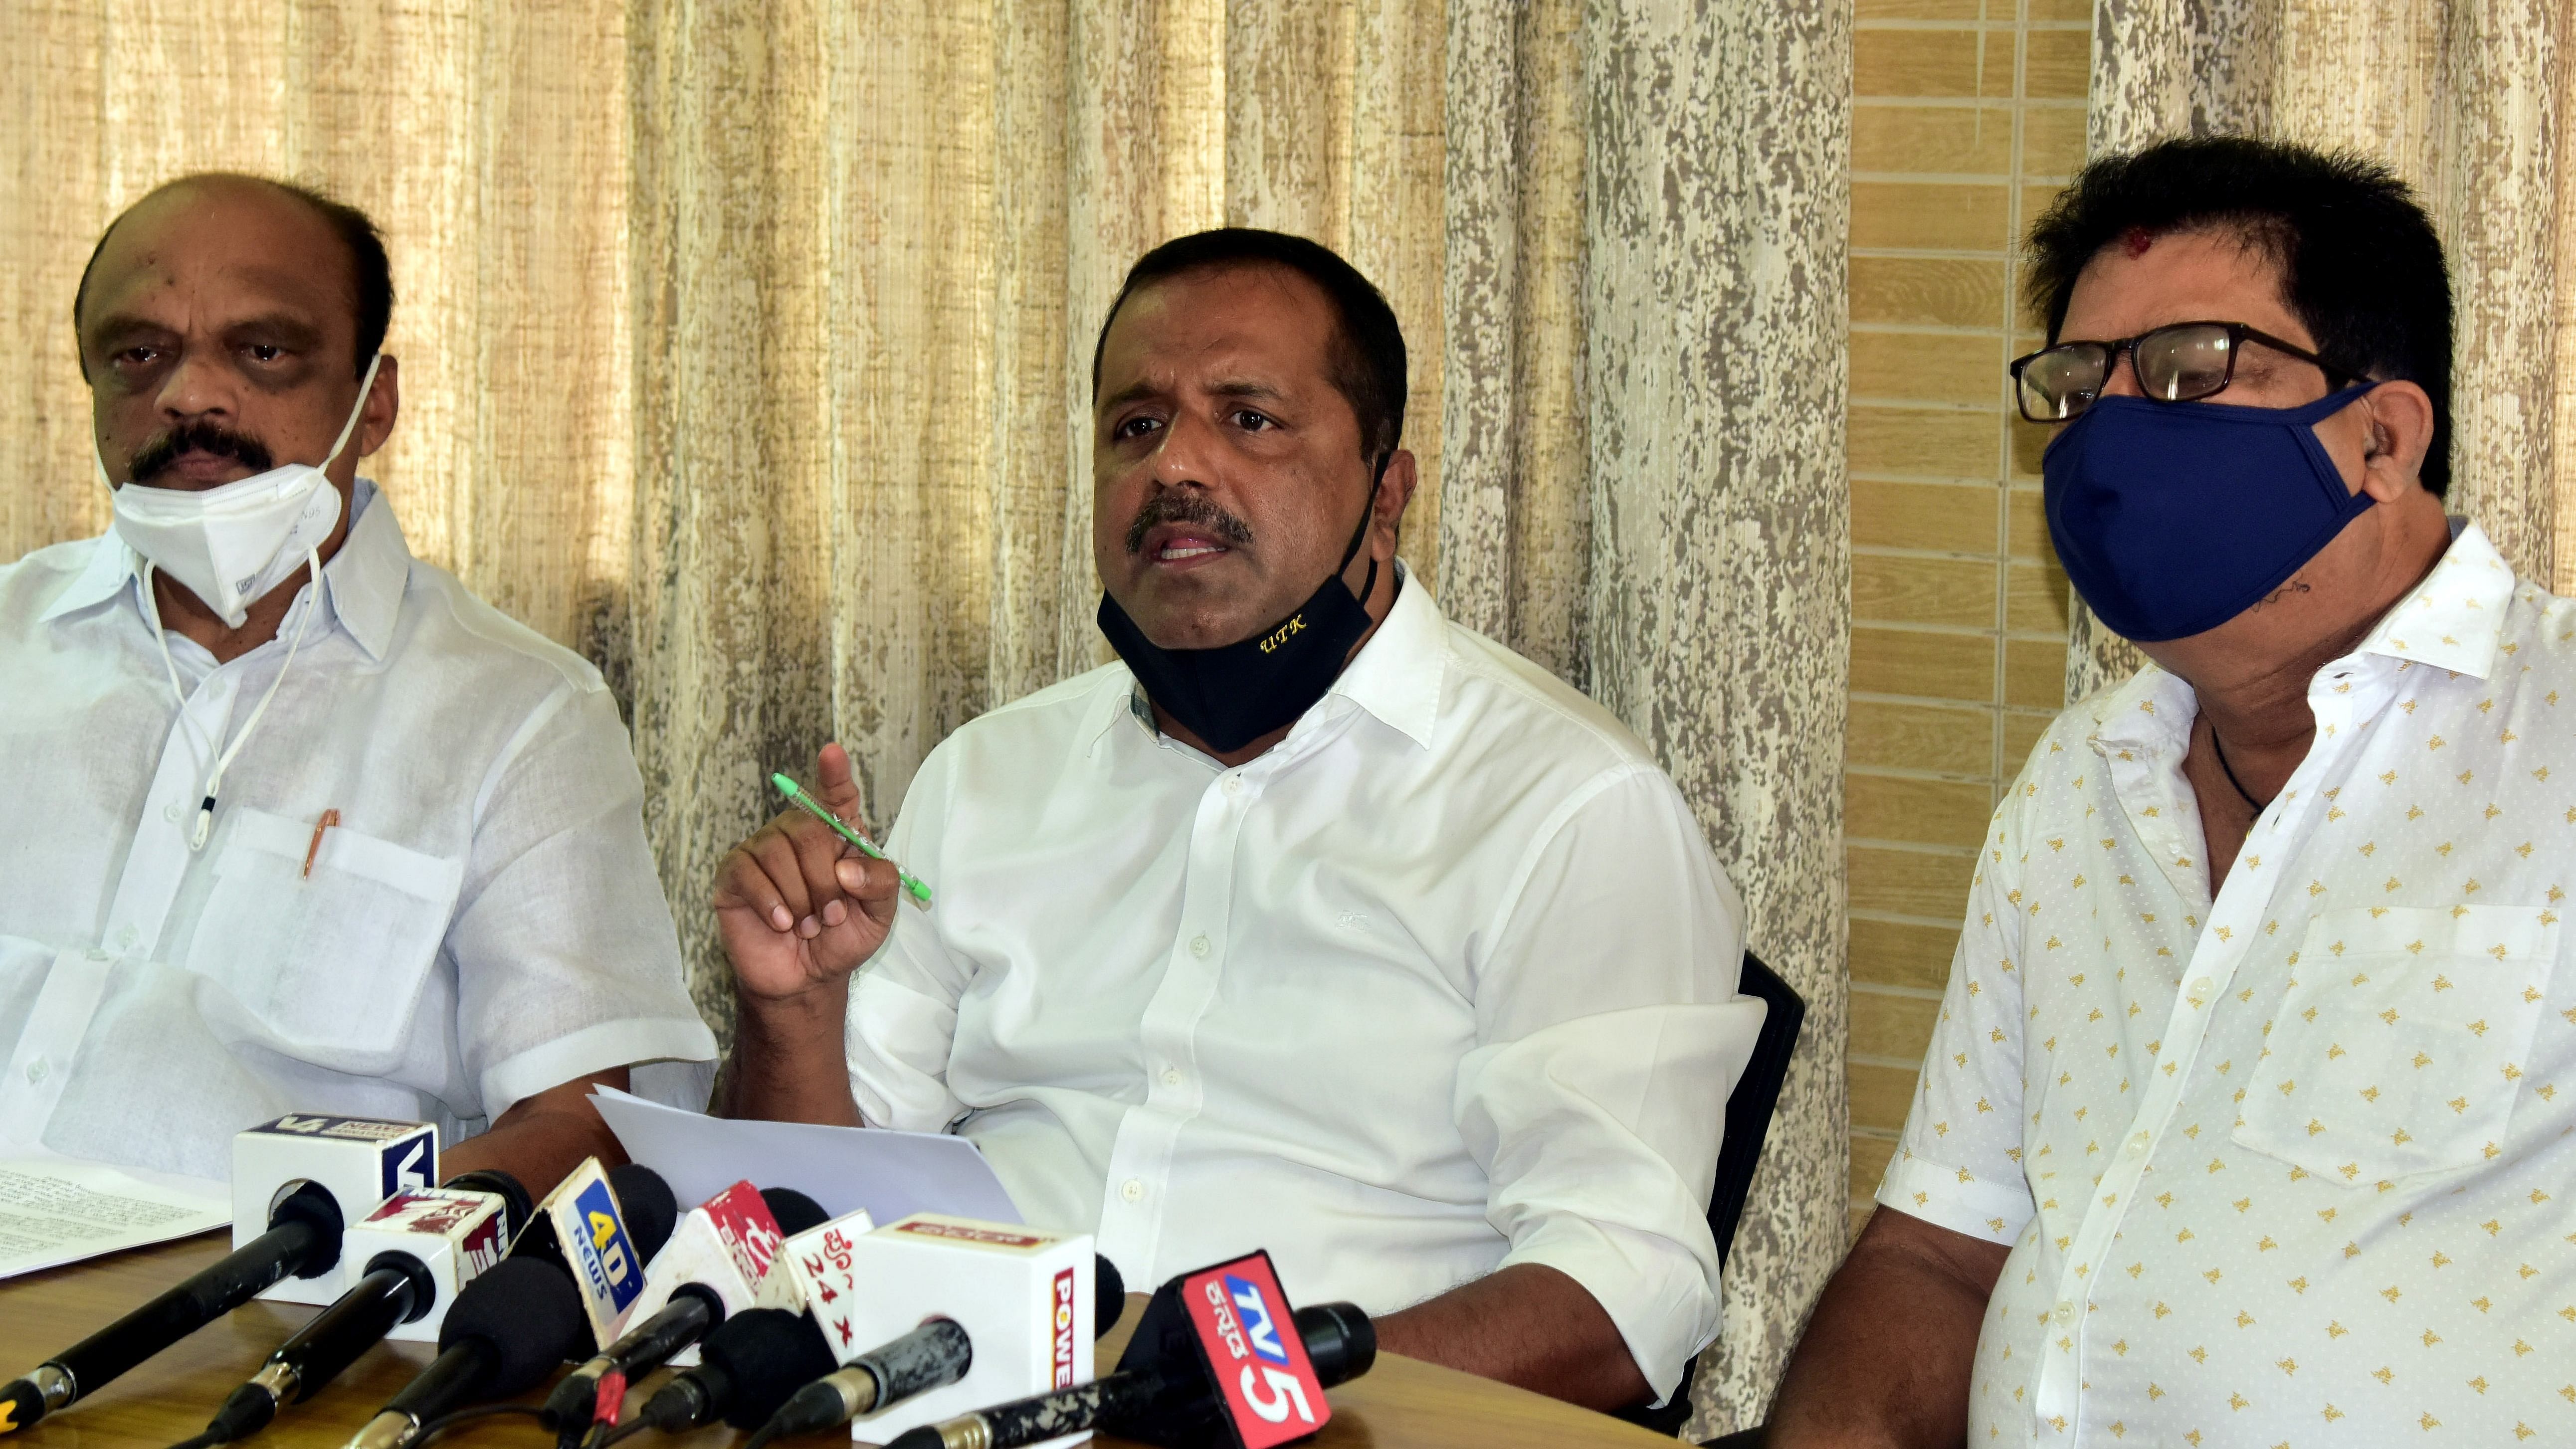 Mangalore MLA and former Minister U T Khader. credit: DH File Photo